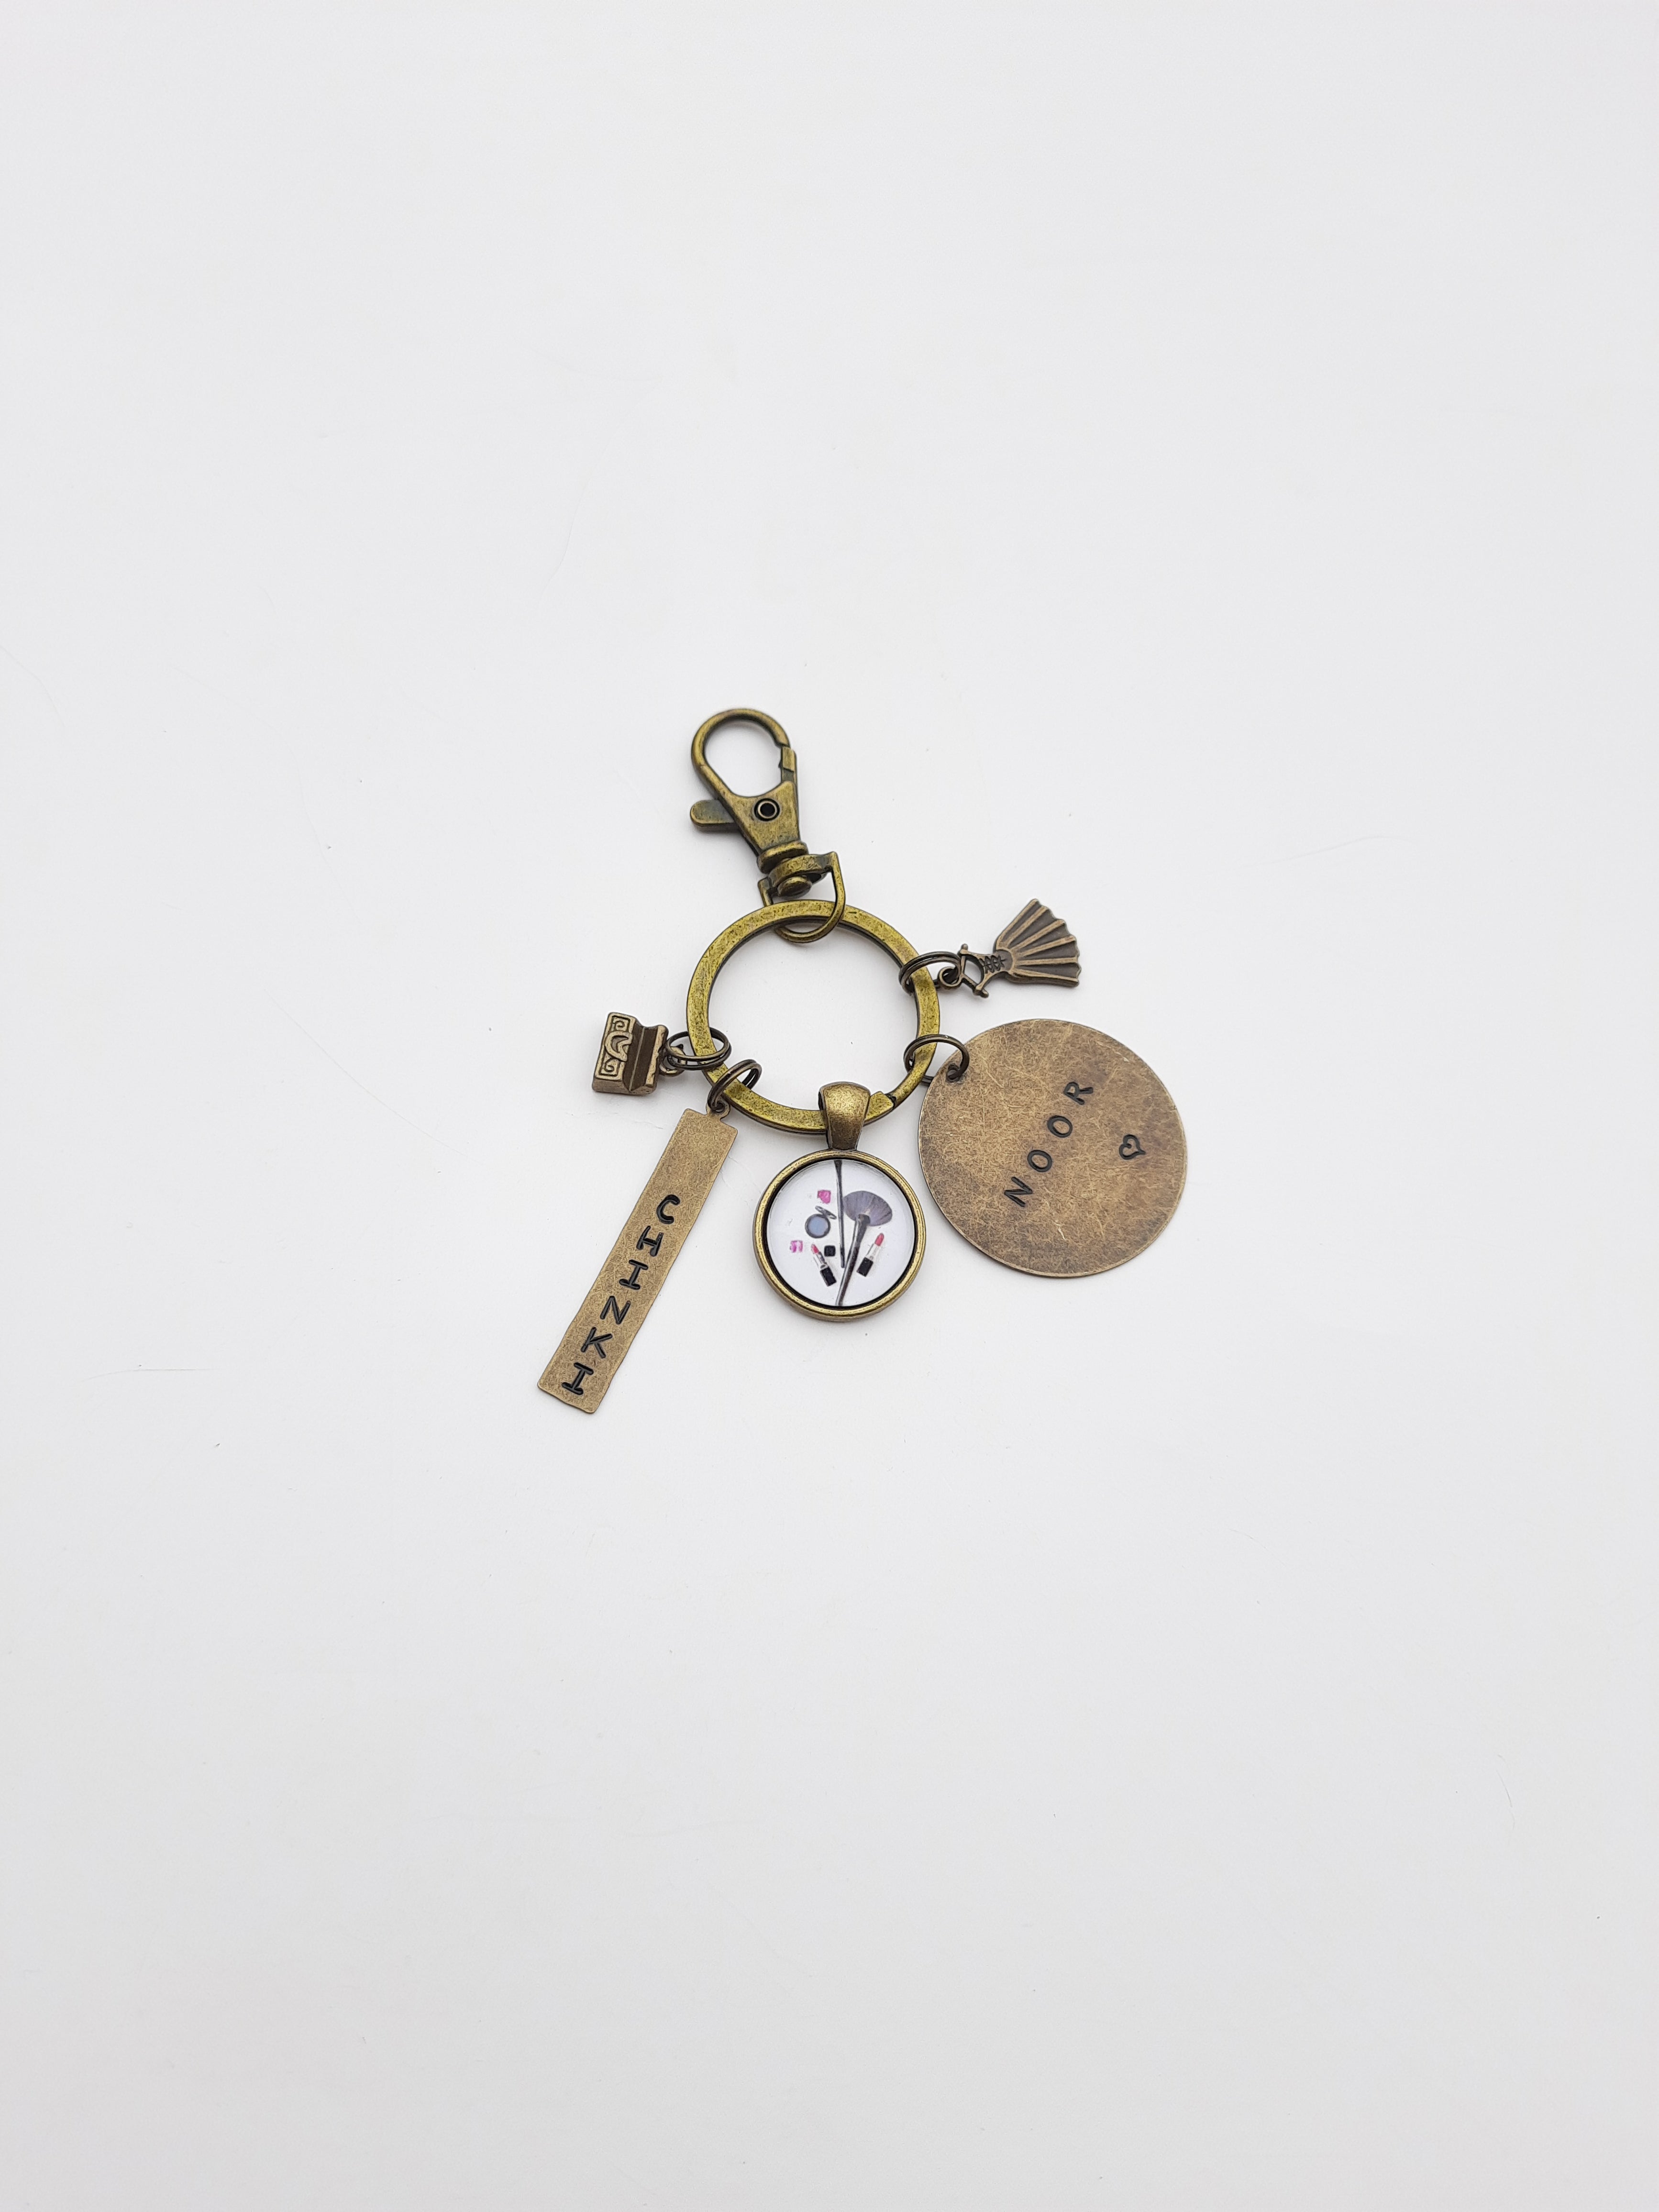 Makeup Keychain with name